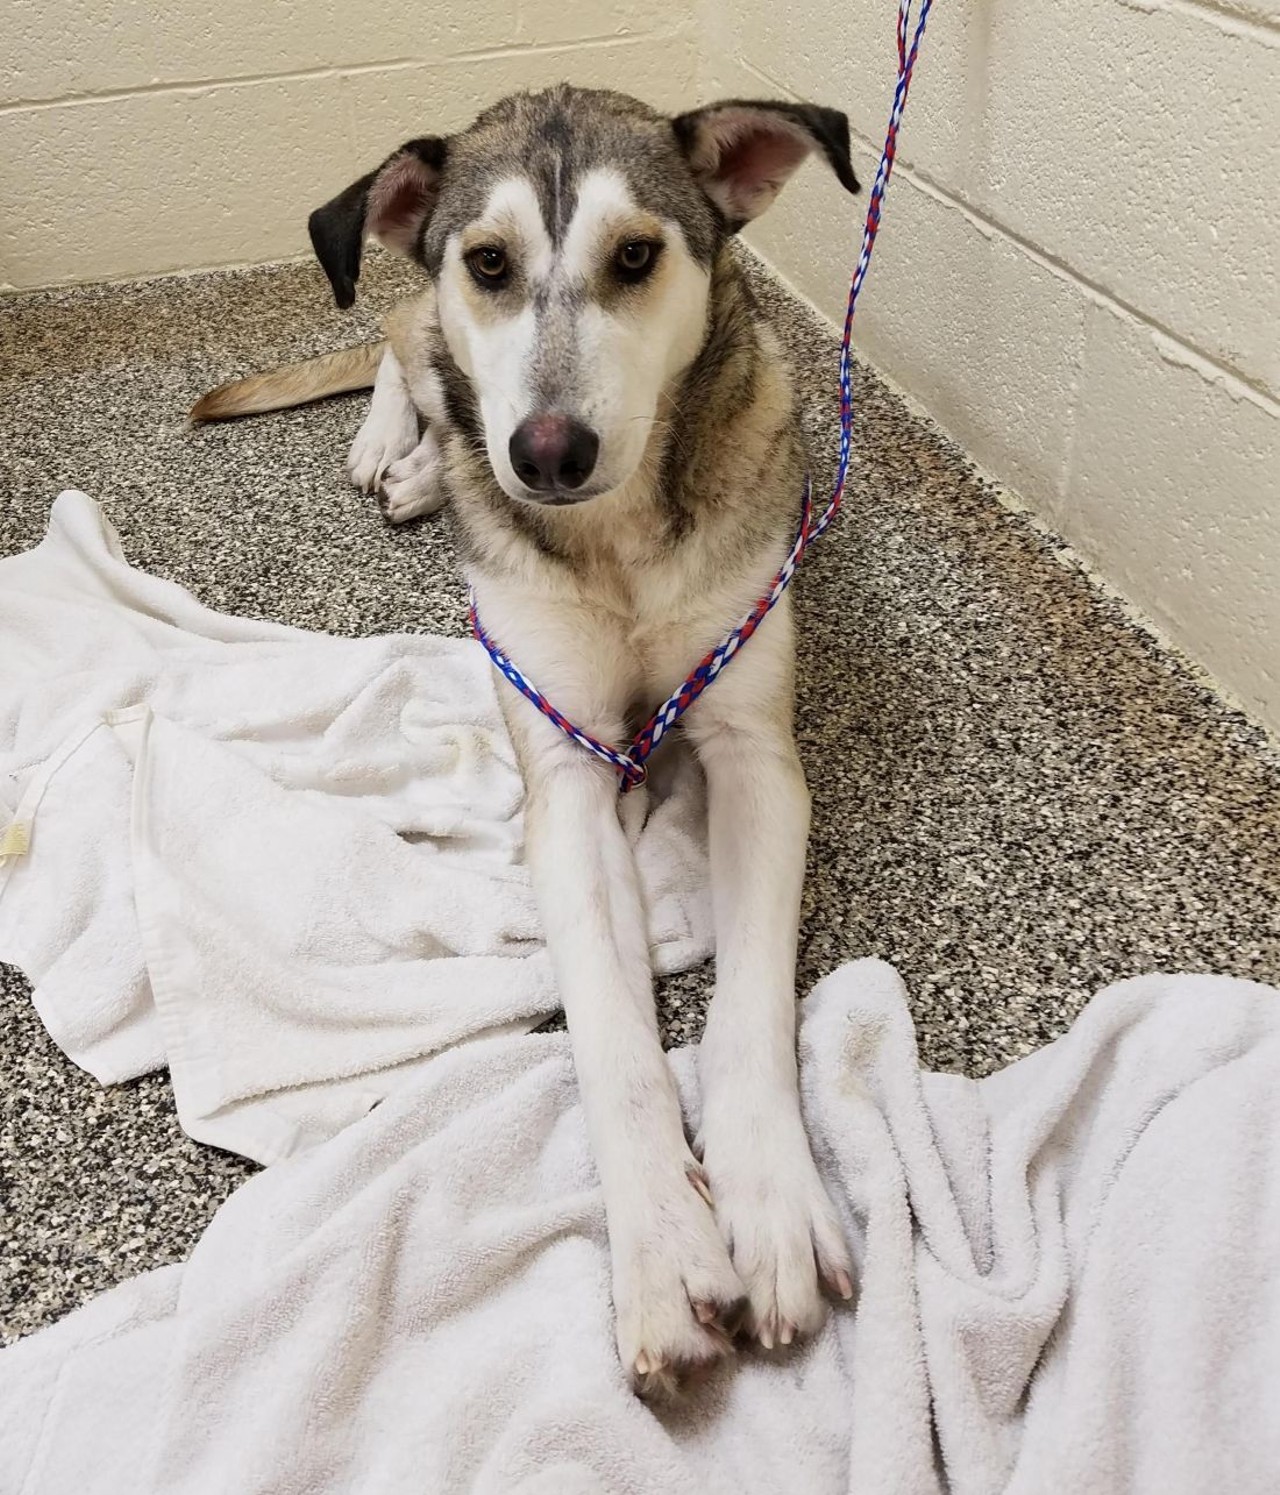 NAME: Luna
GENDER: Female
BREED: Siberian Husky
AGE: 2 years
WEIGHT: 56 pounds
SPECIAL CONSIDERATIONS: None
REASON I CAME TO MHS: Agency transfer
LOCATION: Berman Center for Animal Care in Westland
ID NUMBER: 864213